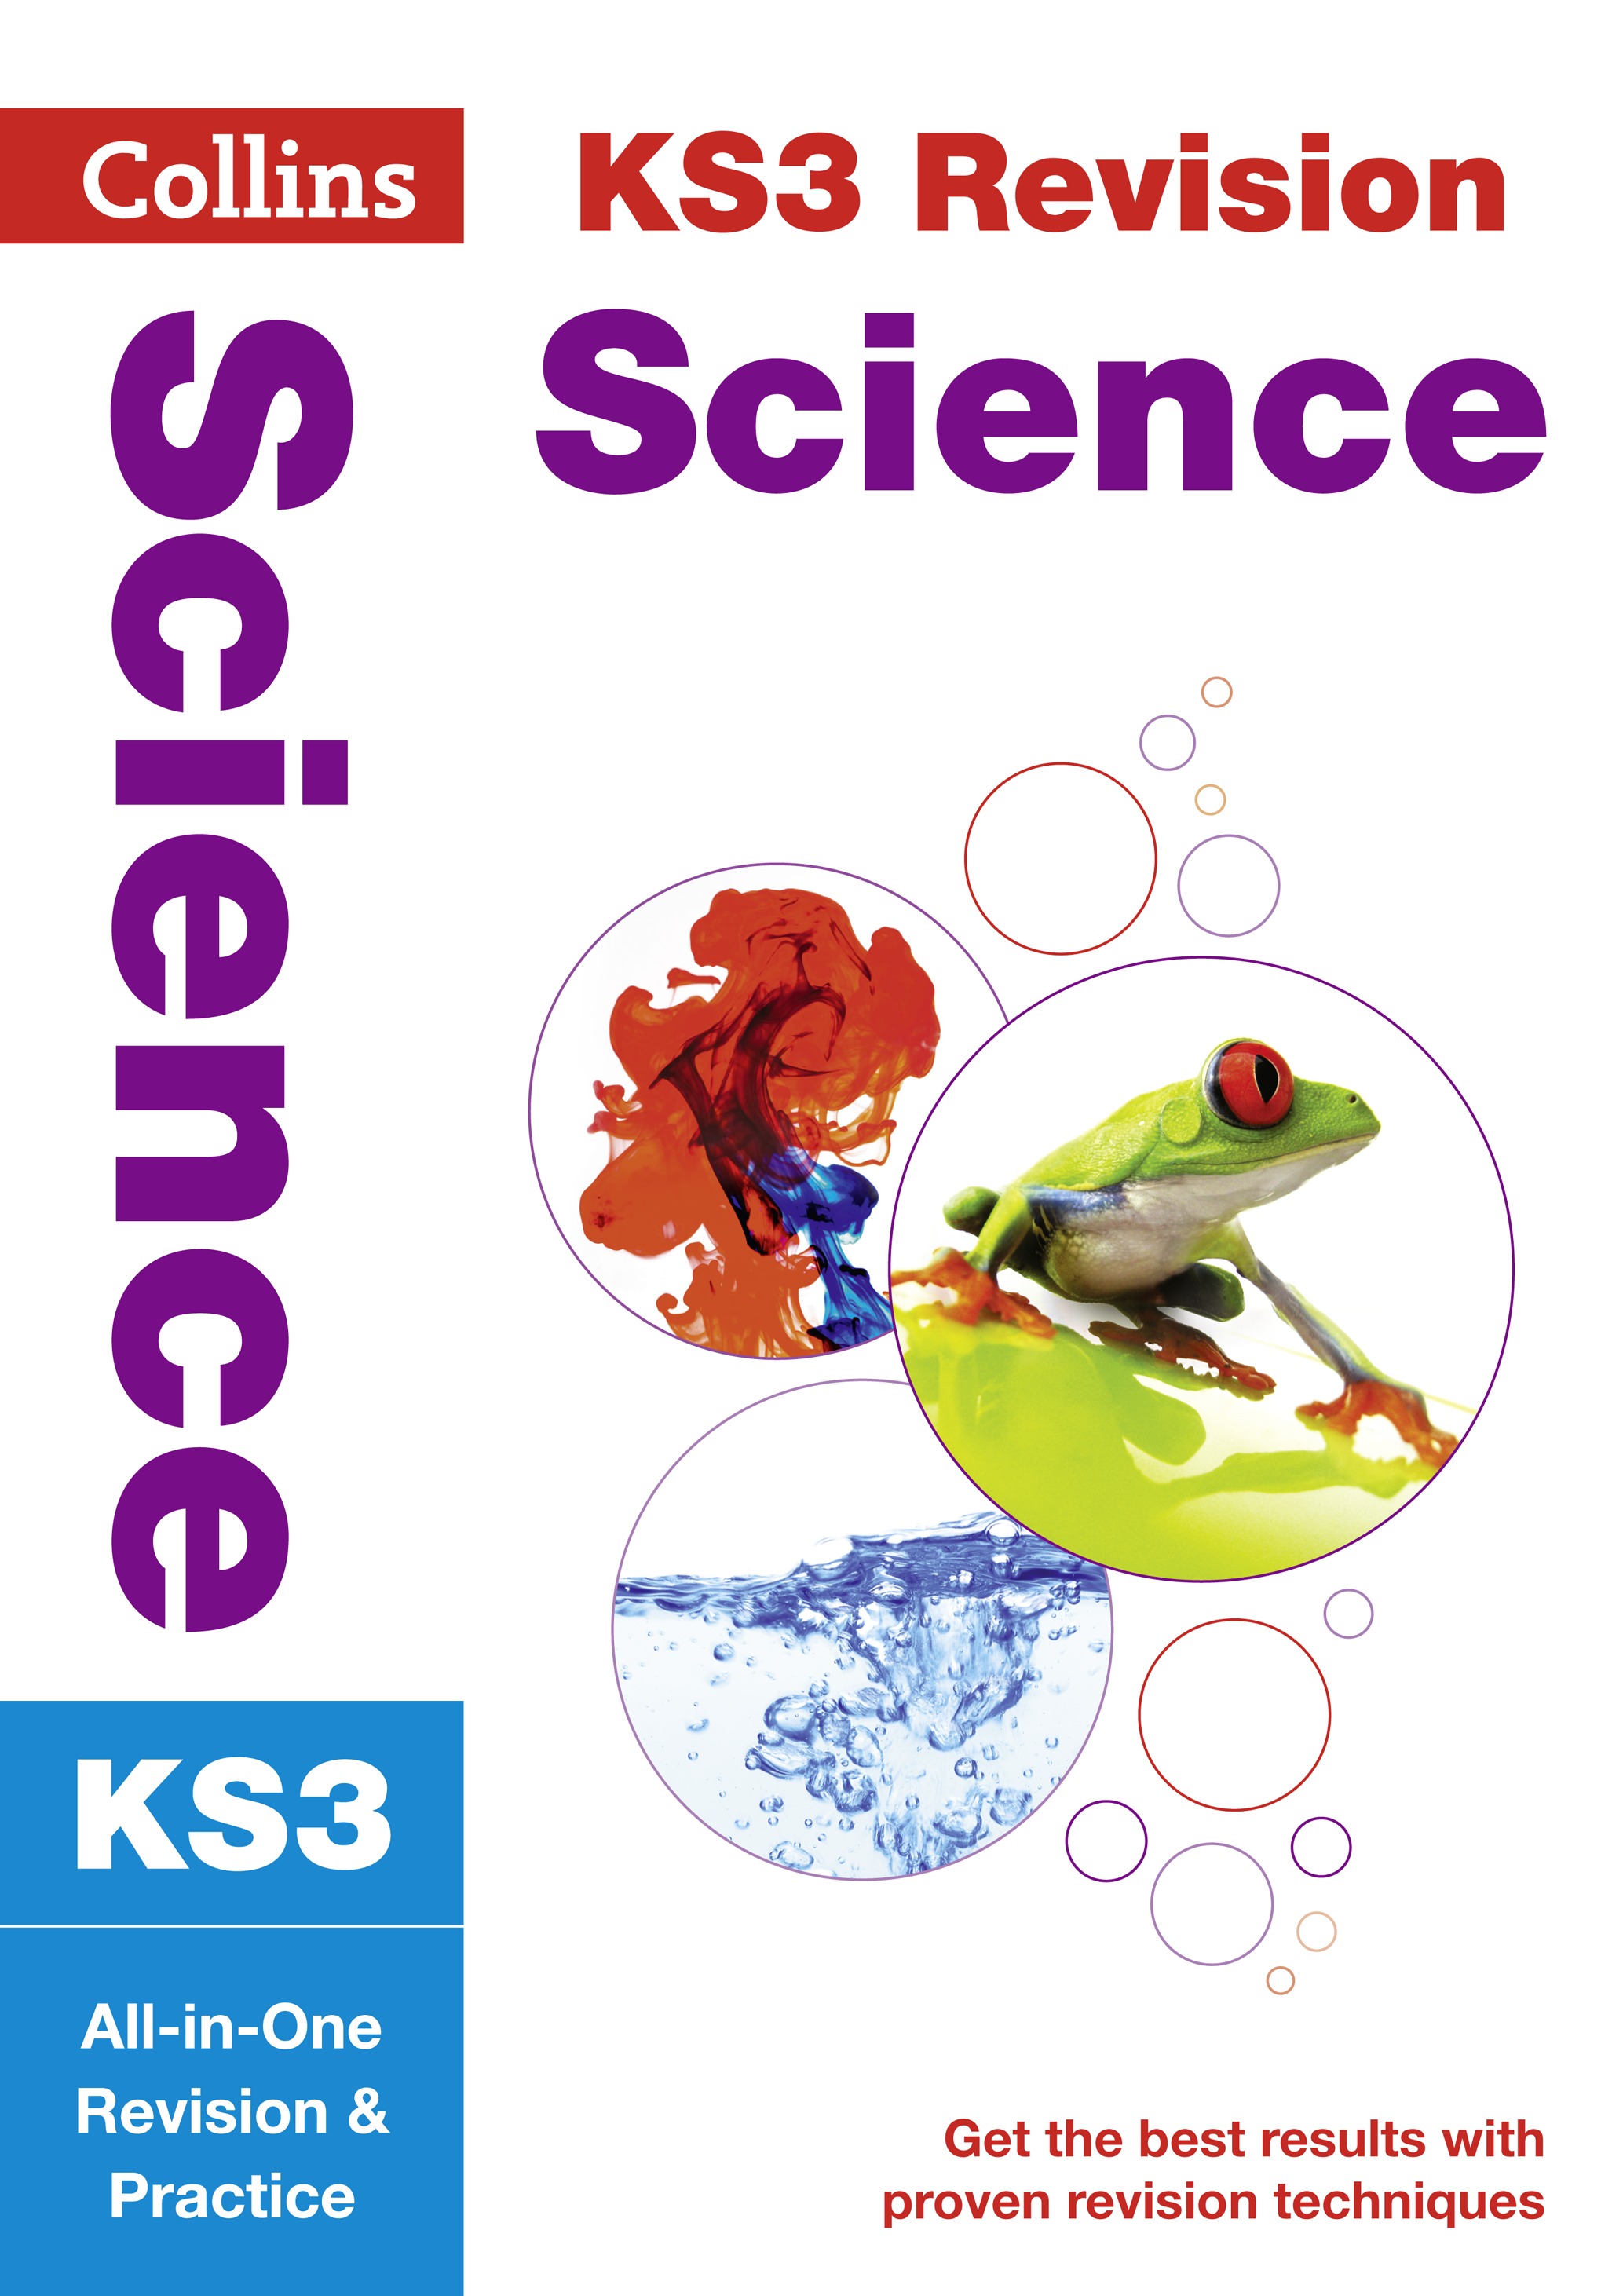 ks3 revision science all in one revision and practice guide